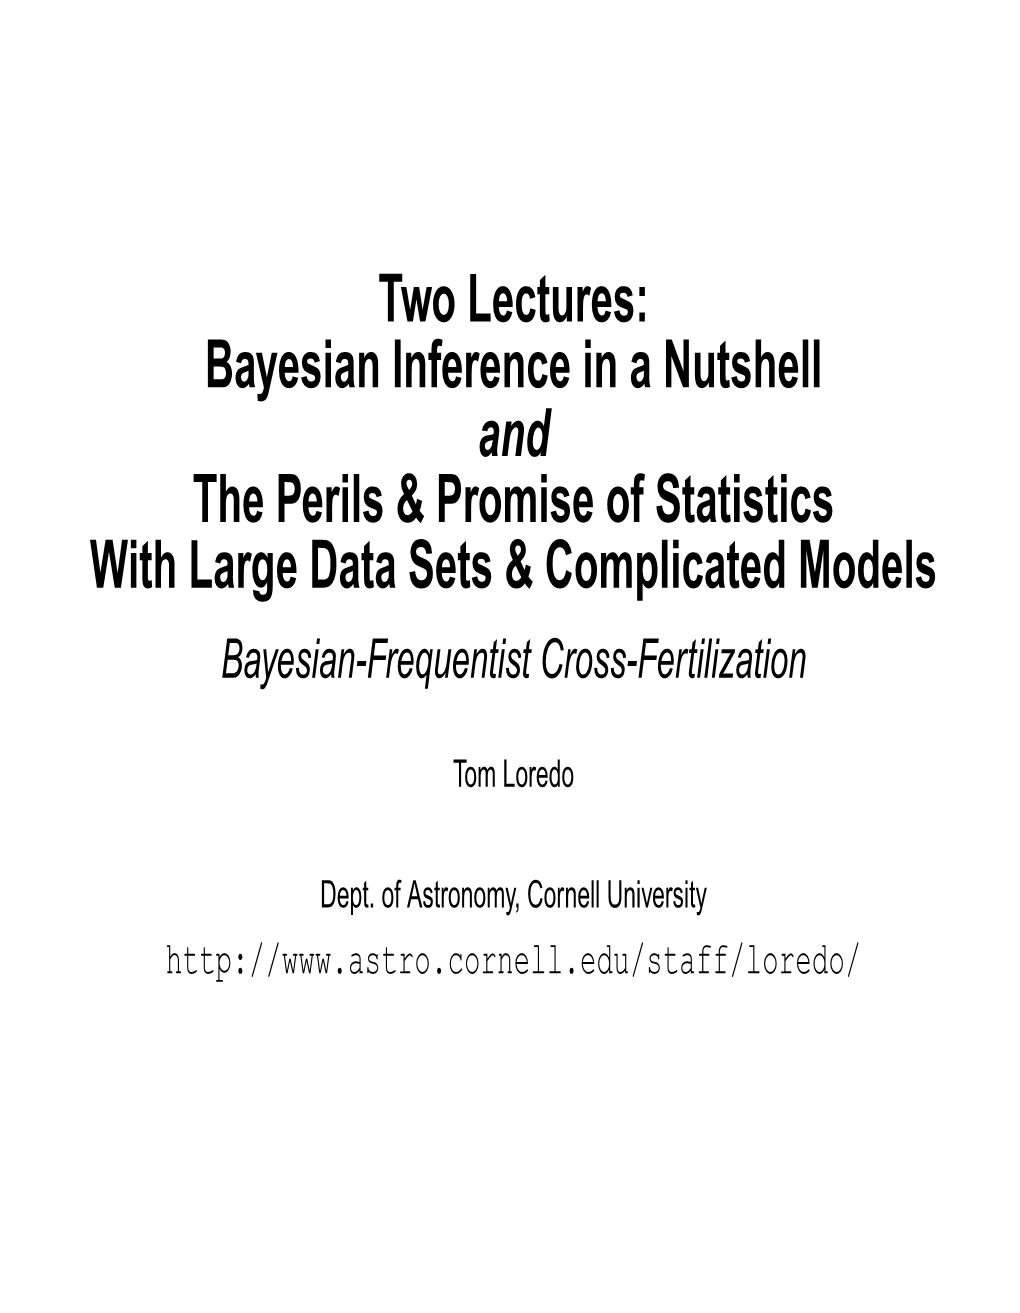 Two Lectures: Bayesian Inference in a Nutshell and the Perils & Promise